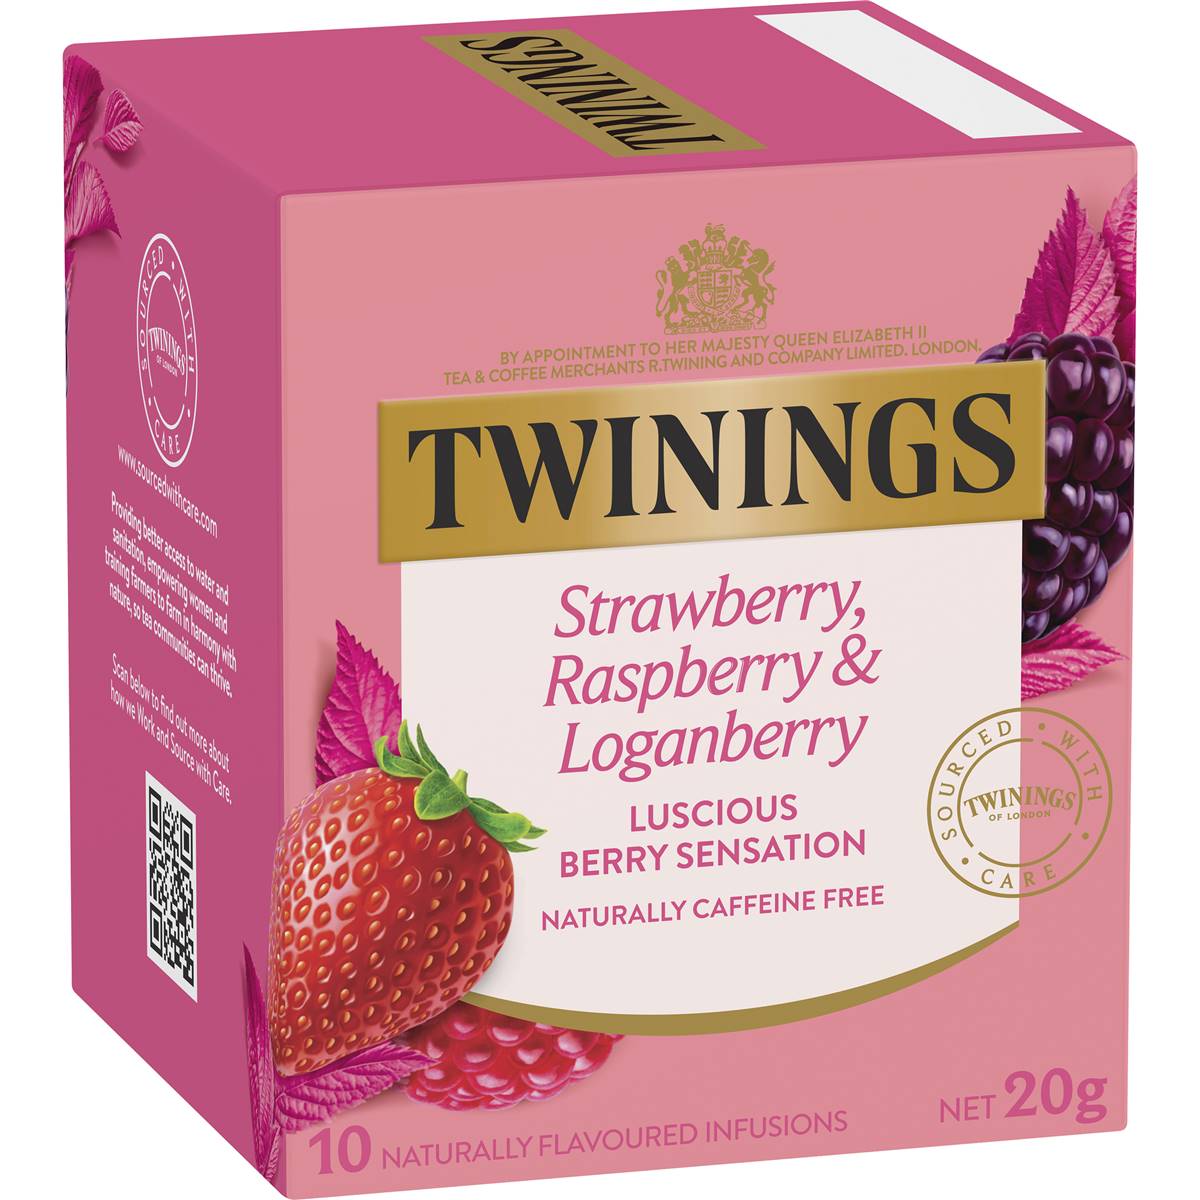 Calories in Twinings Strawberry, Raspberry & Loganberry Tea Bags